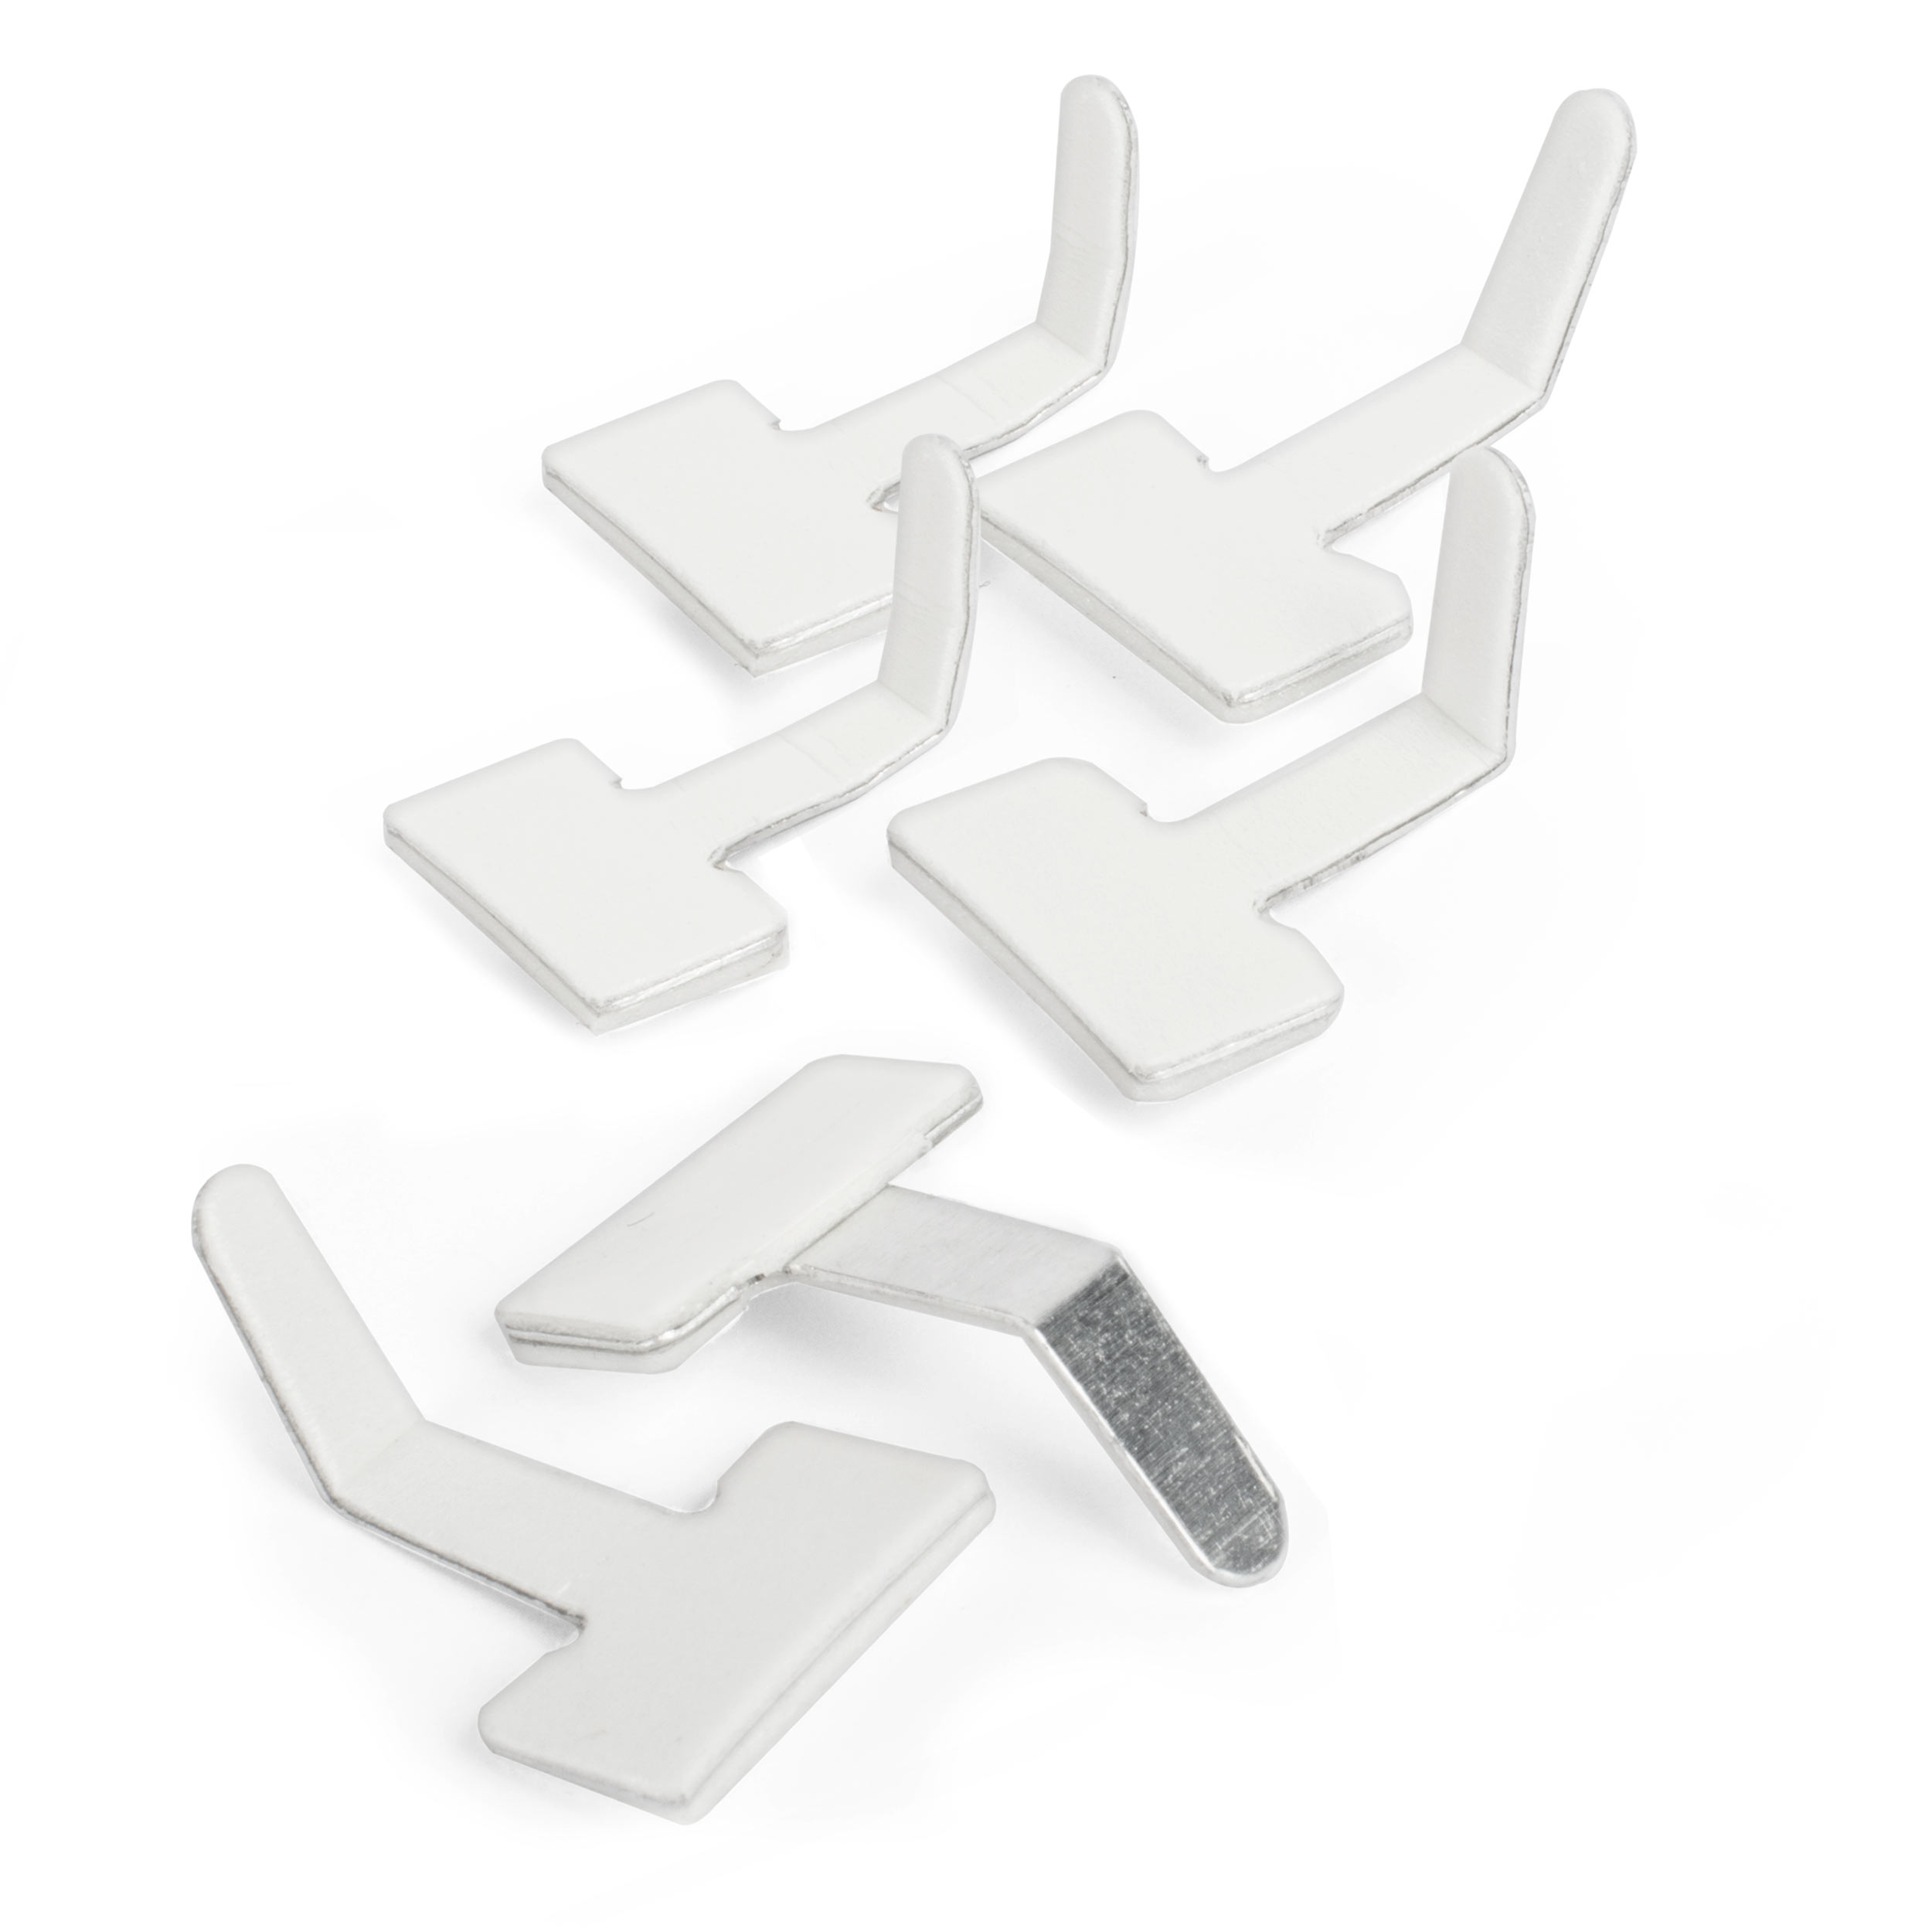 Self-stick Wiring Clips for Acoustic Pickups - 6 Pack - StewMac